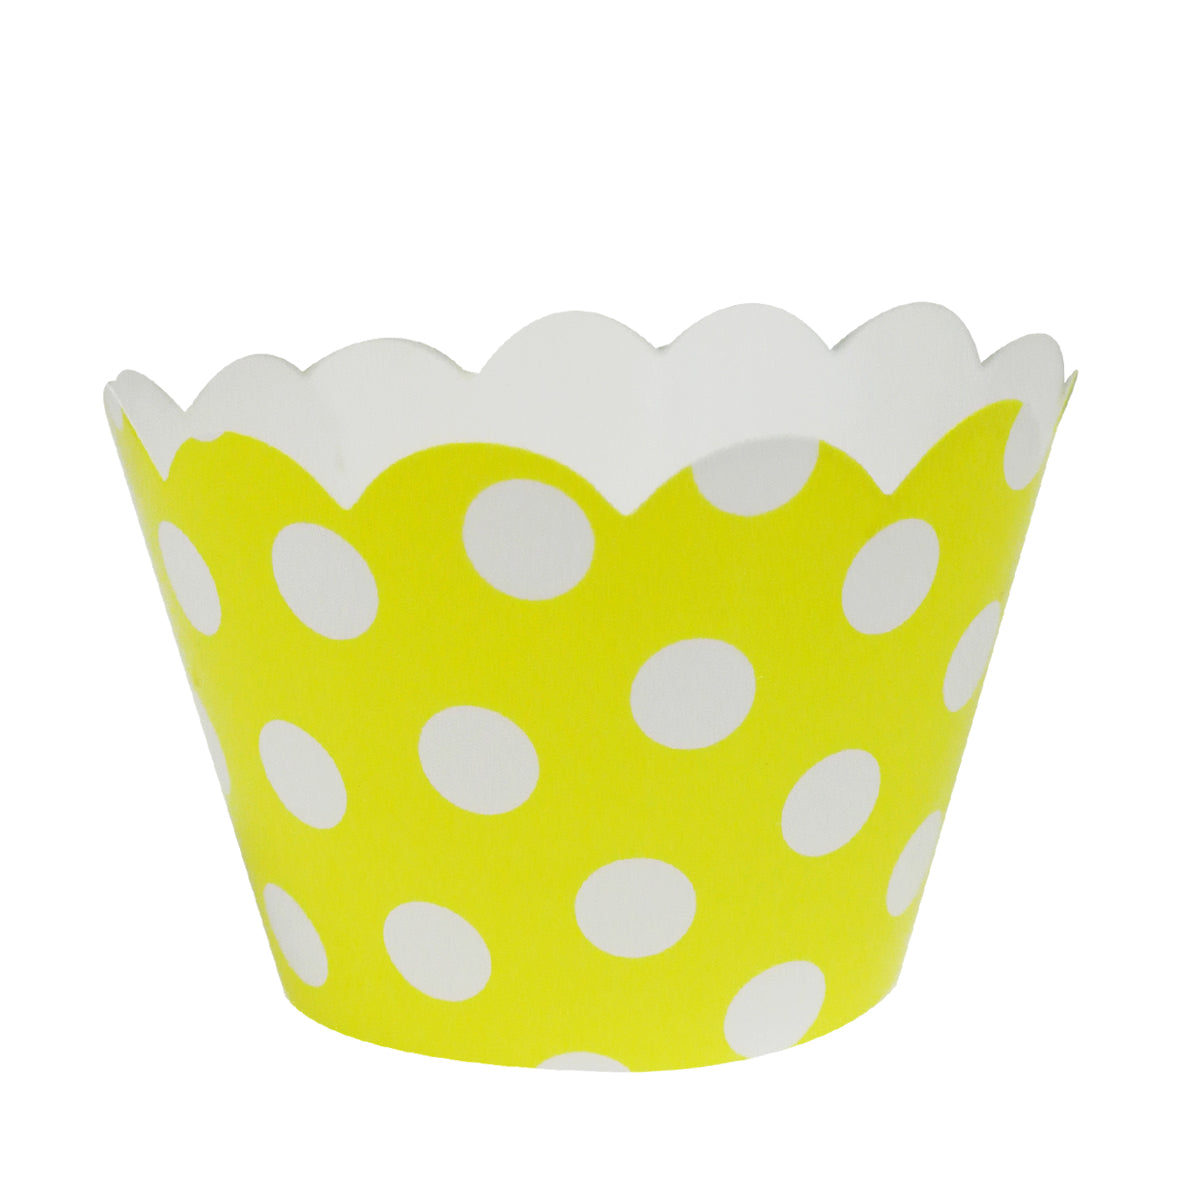 Wrapables Hearts Cupcake Wrappers, Standard size, Yellow, Set of 20